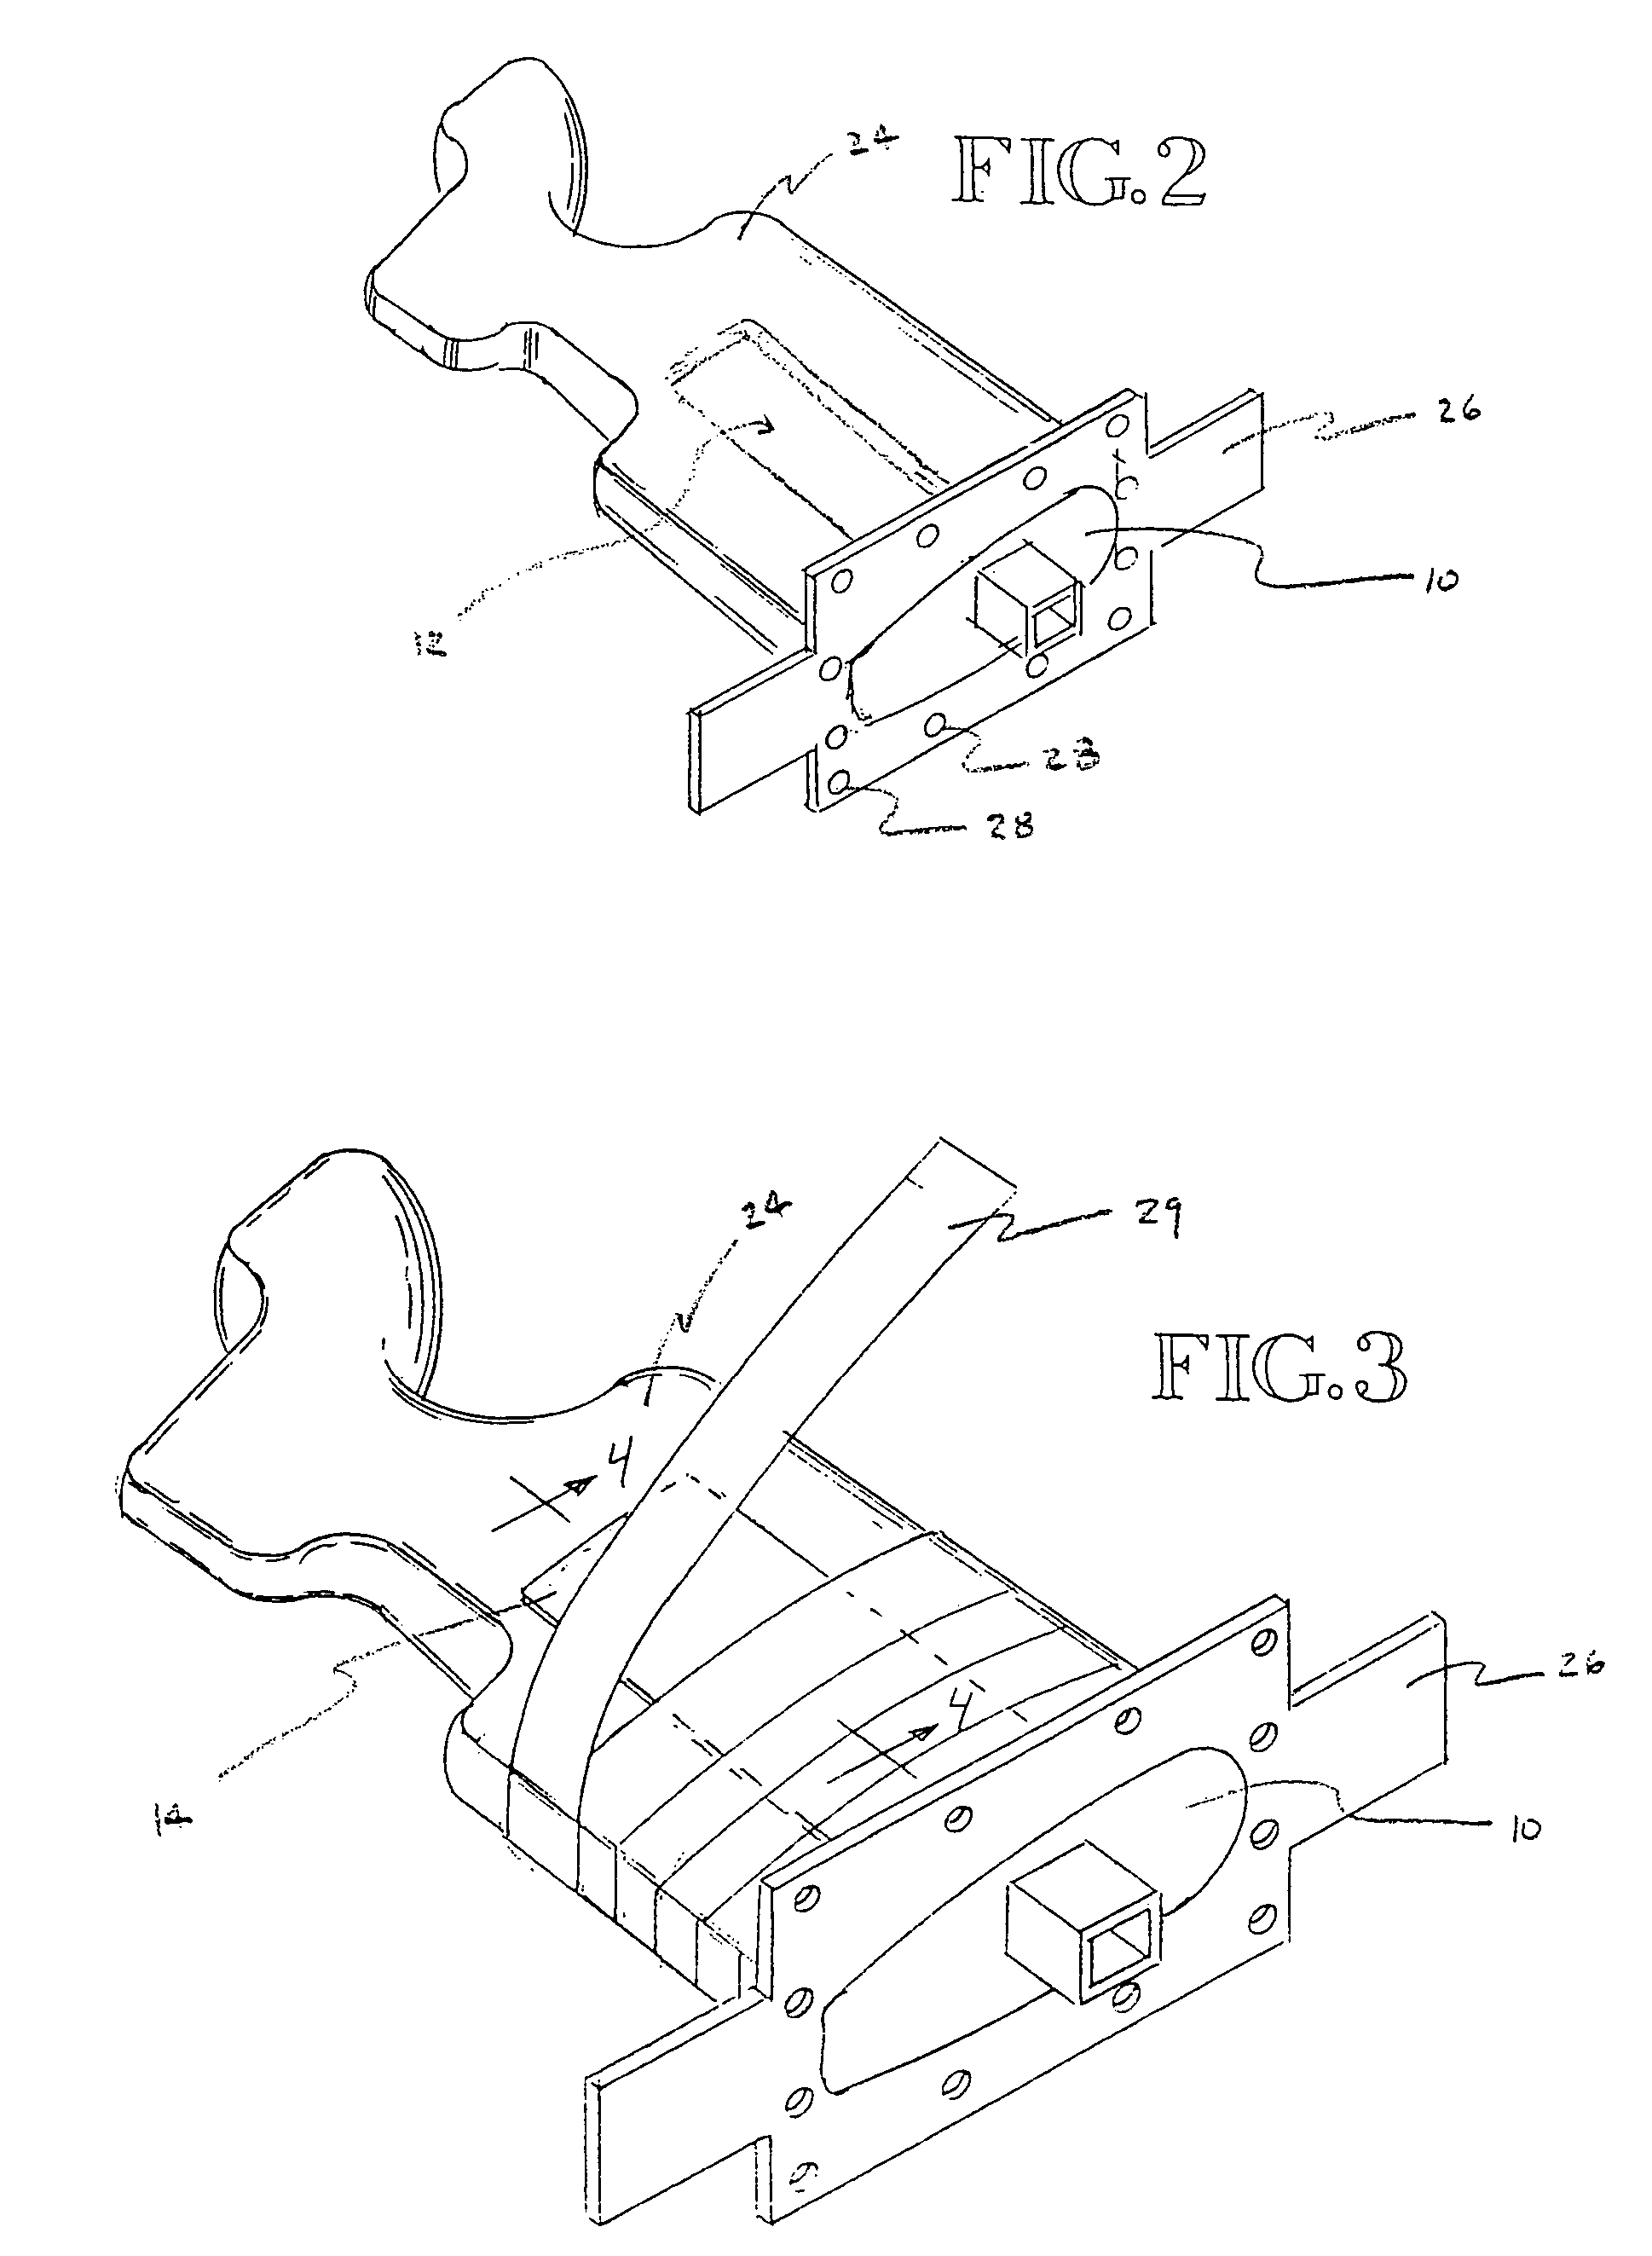 Methods for forming fiber reinforced composite parts having one or more selectively positioned core, structural insert, or veneer pieces integrally associated therewith